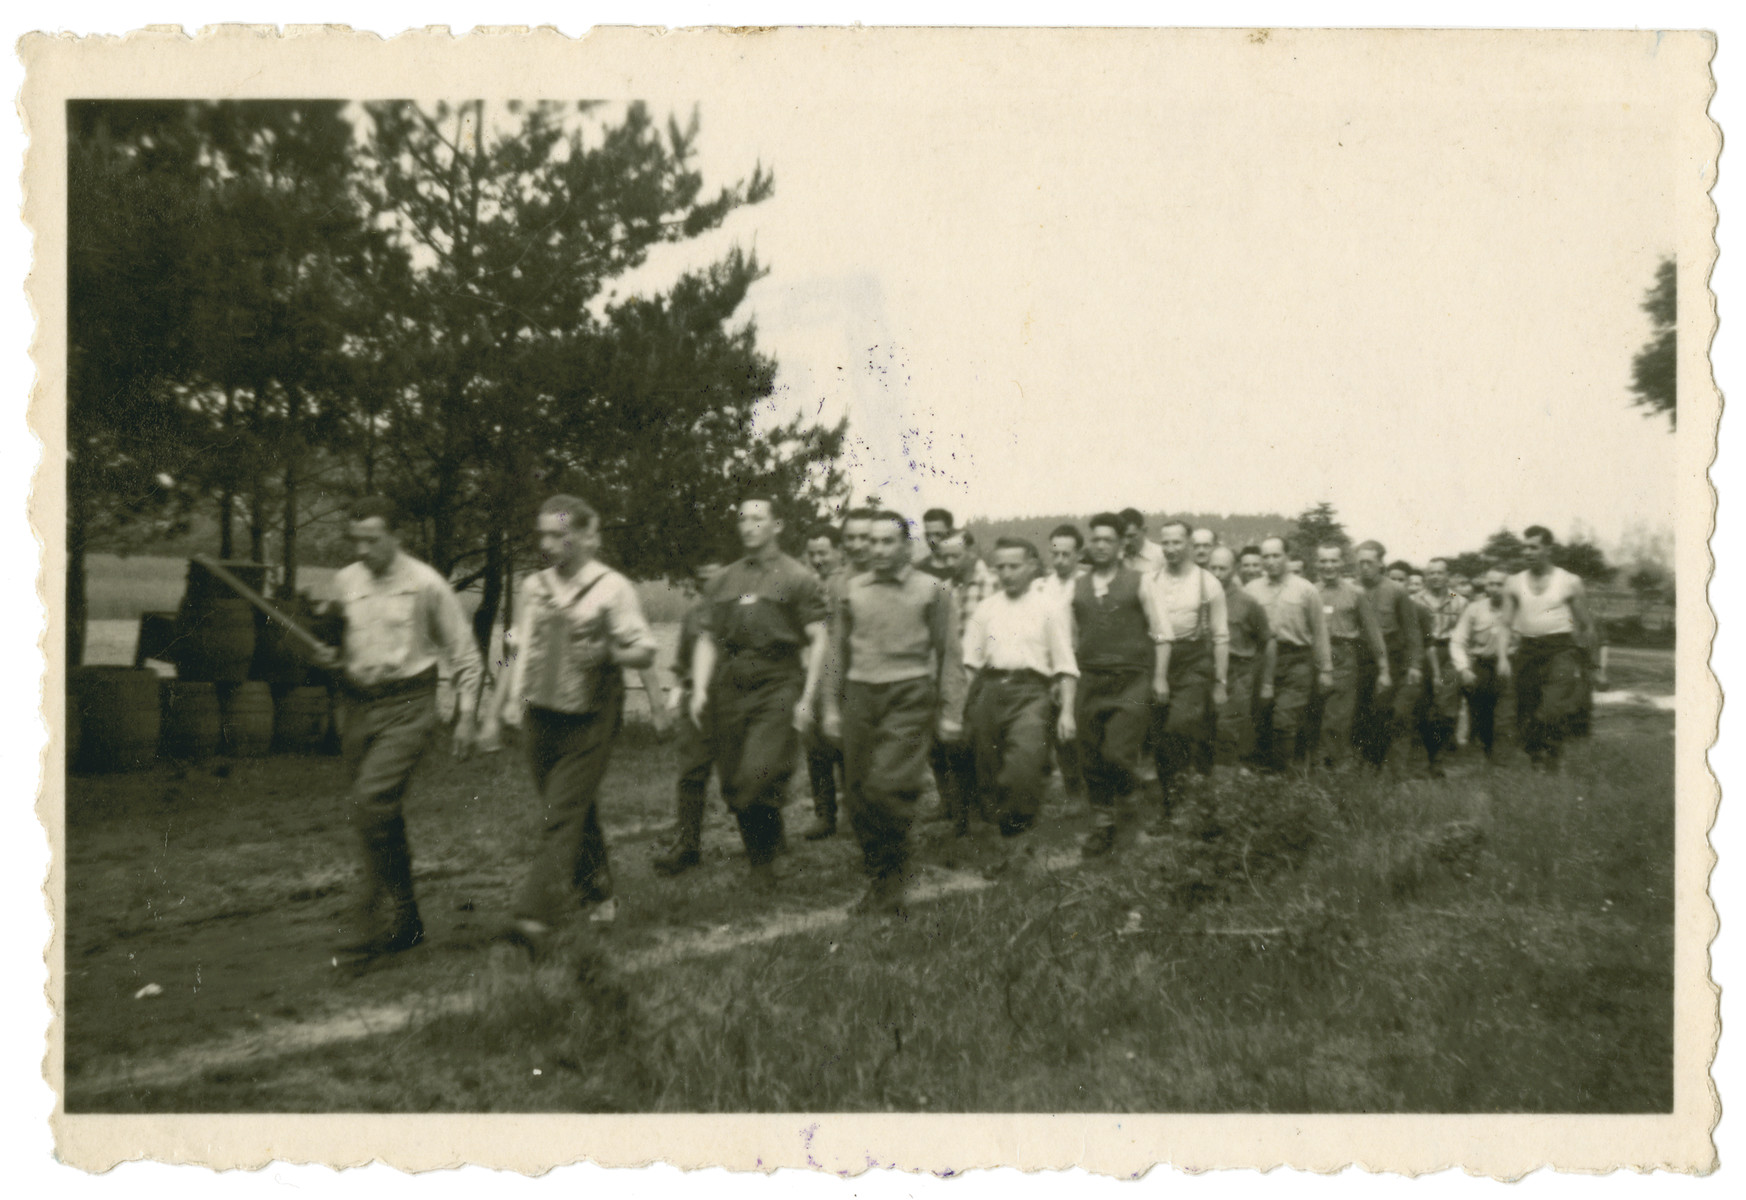 Belgian POWs march through Stalag 10 C led by one man playing accordion and another holding a violin.